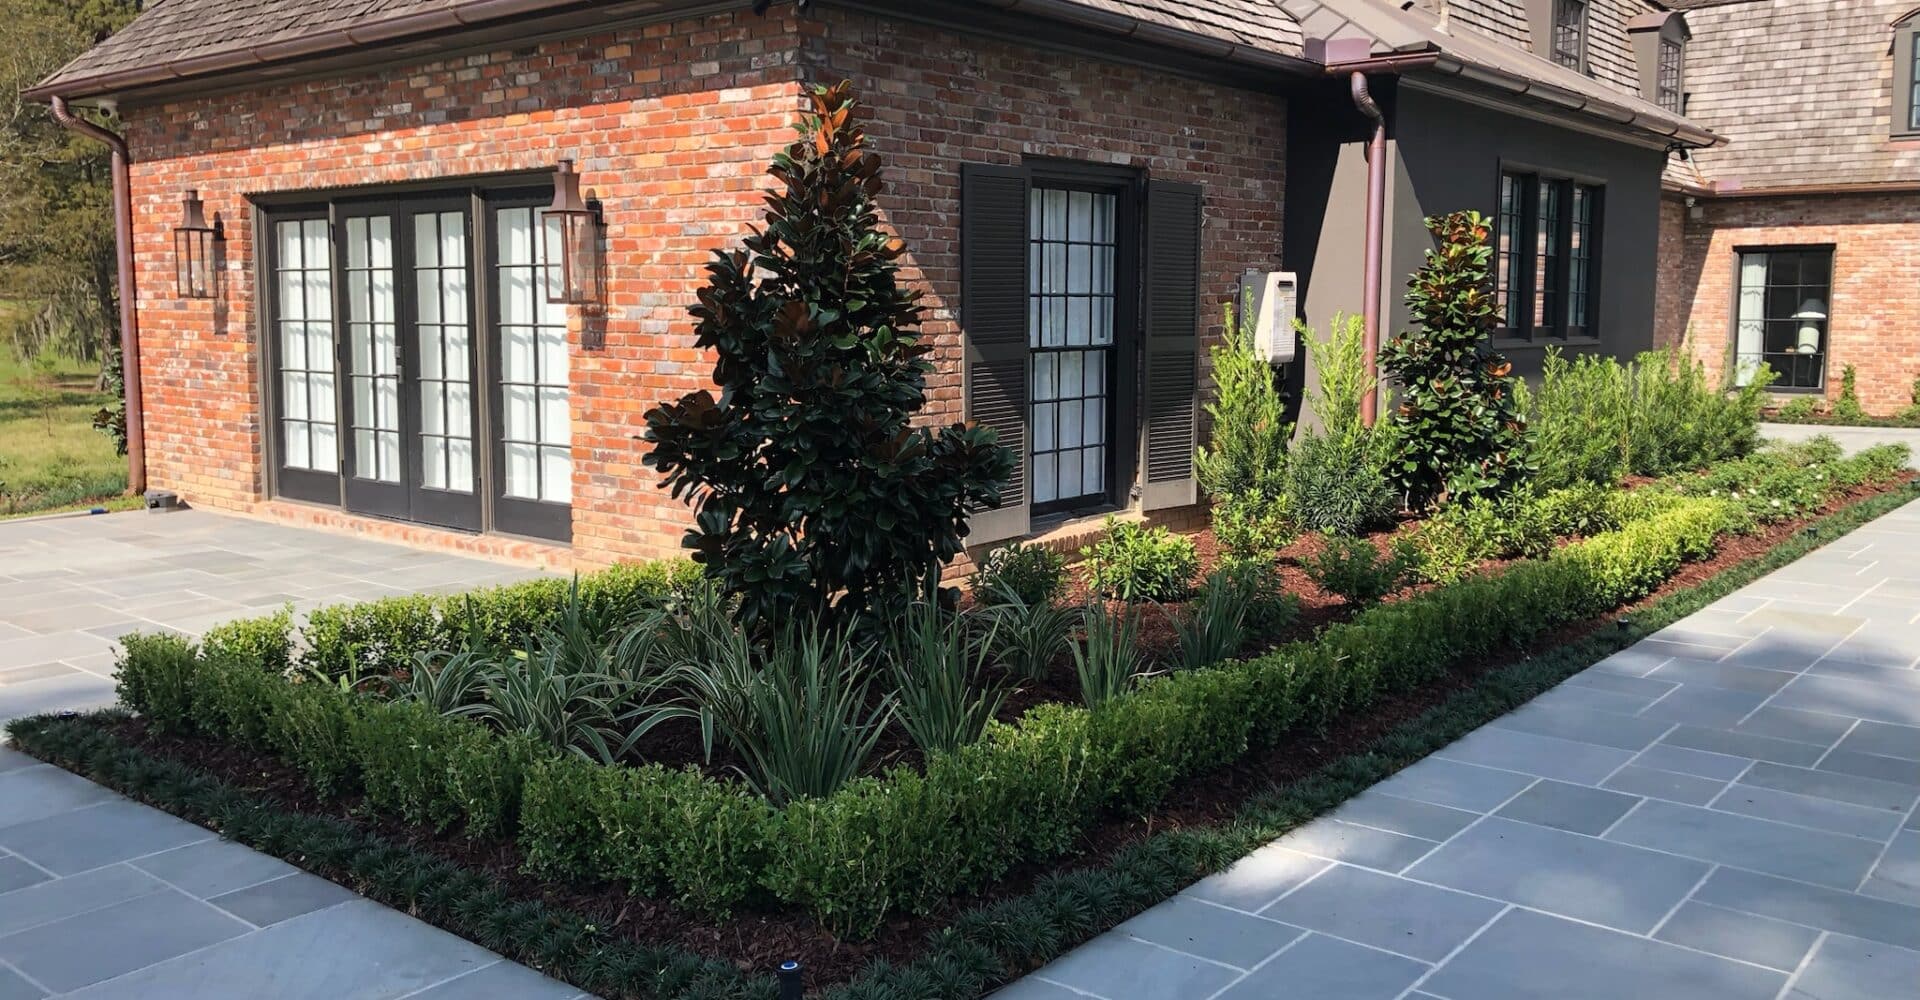 Butler Residence Landscape Design And Architecture - Baton Rouge